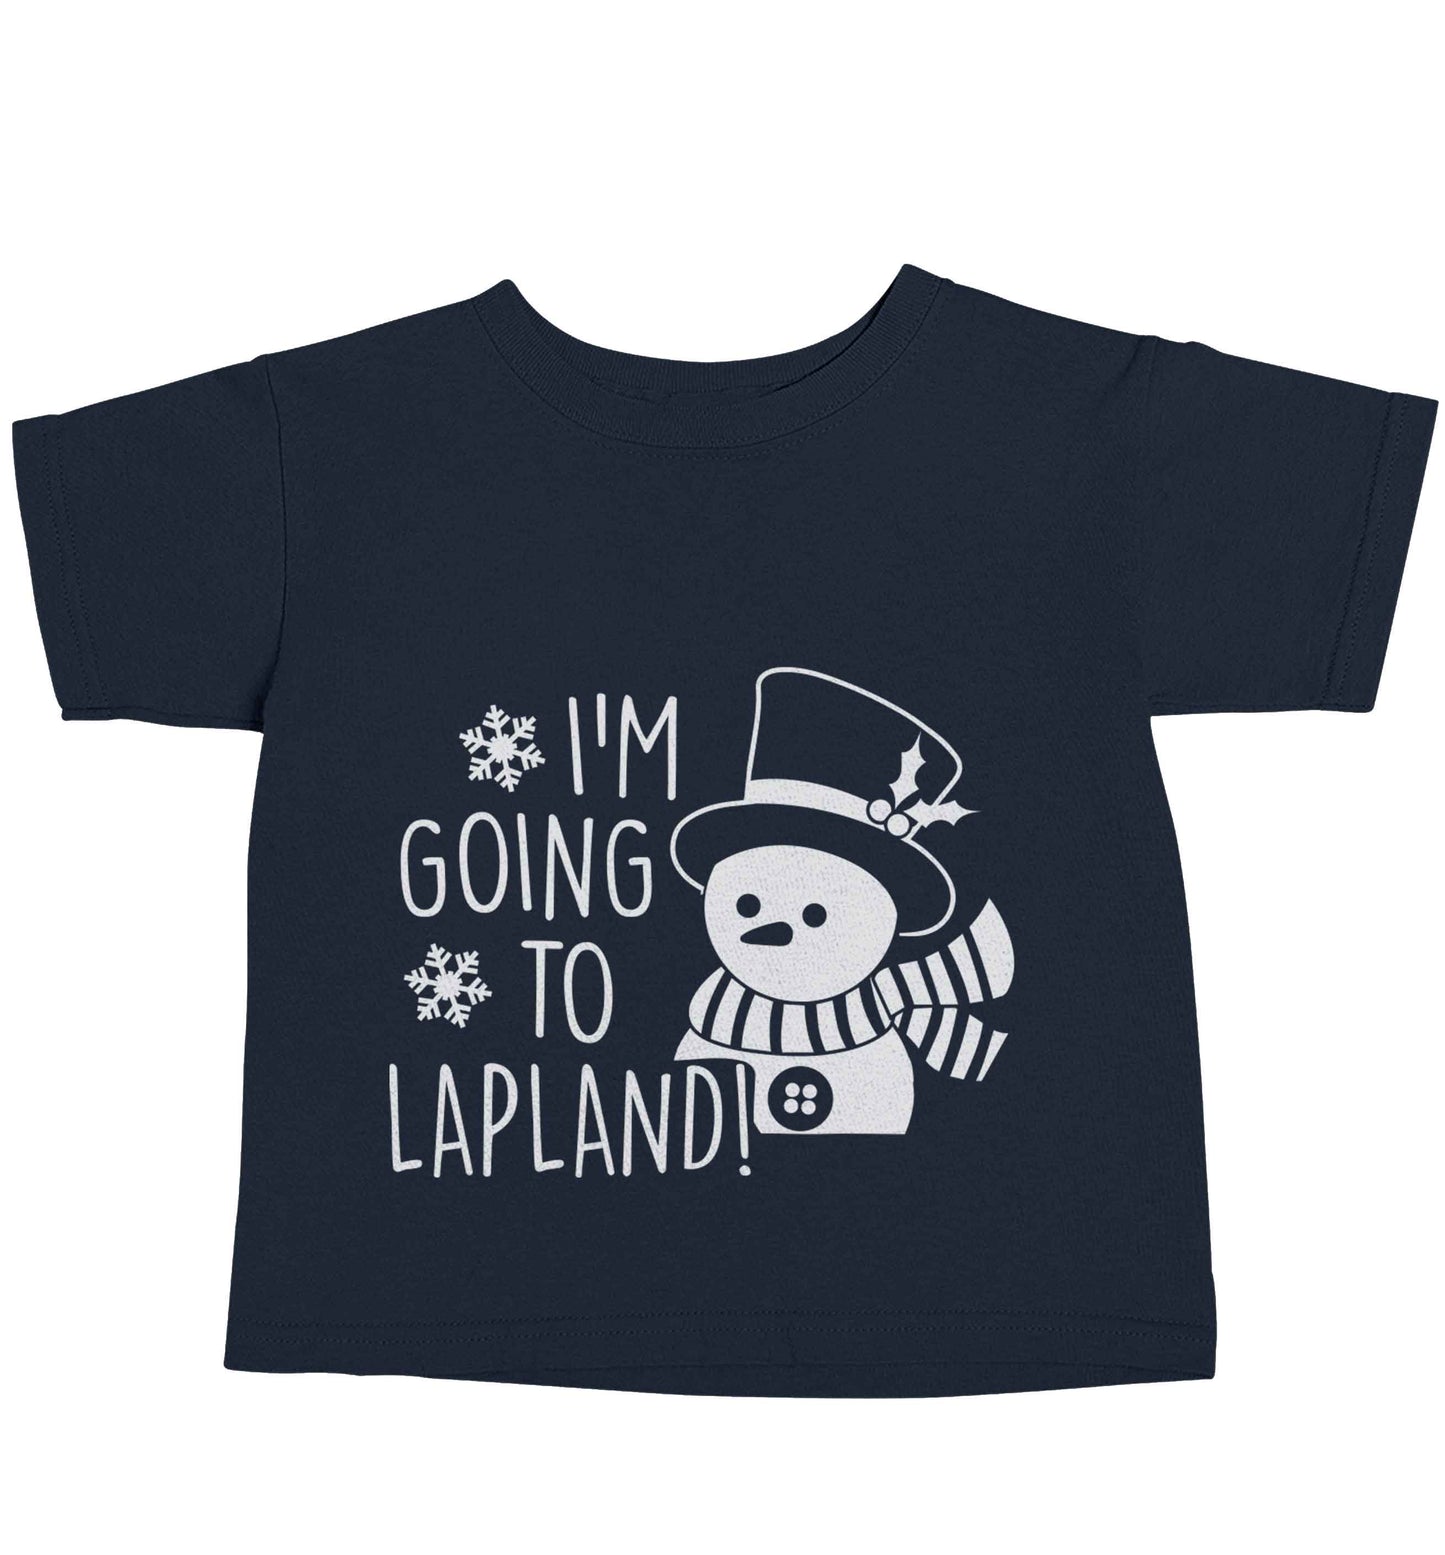 I'm going to Lapland navy baby toddler Tshirt 2 Years